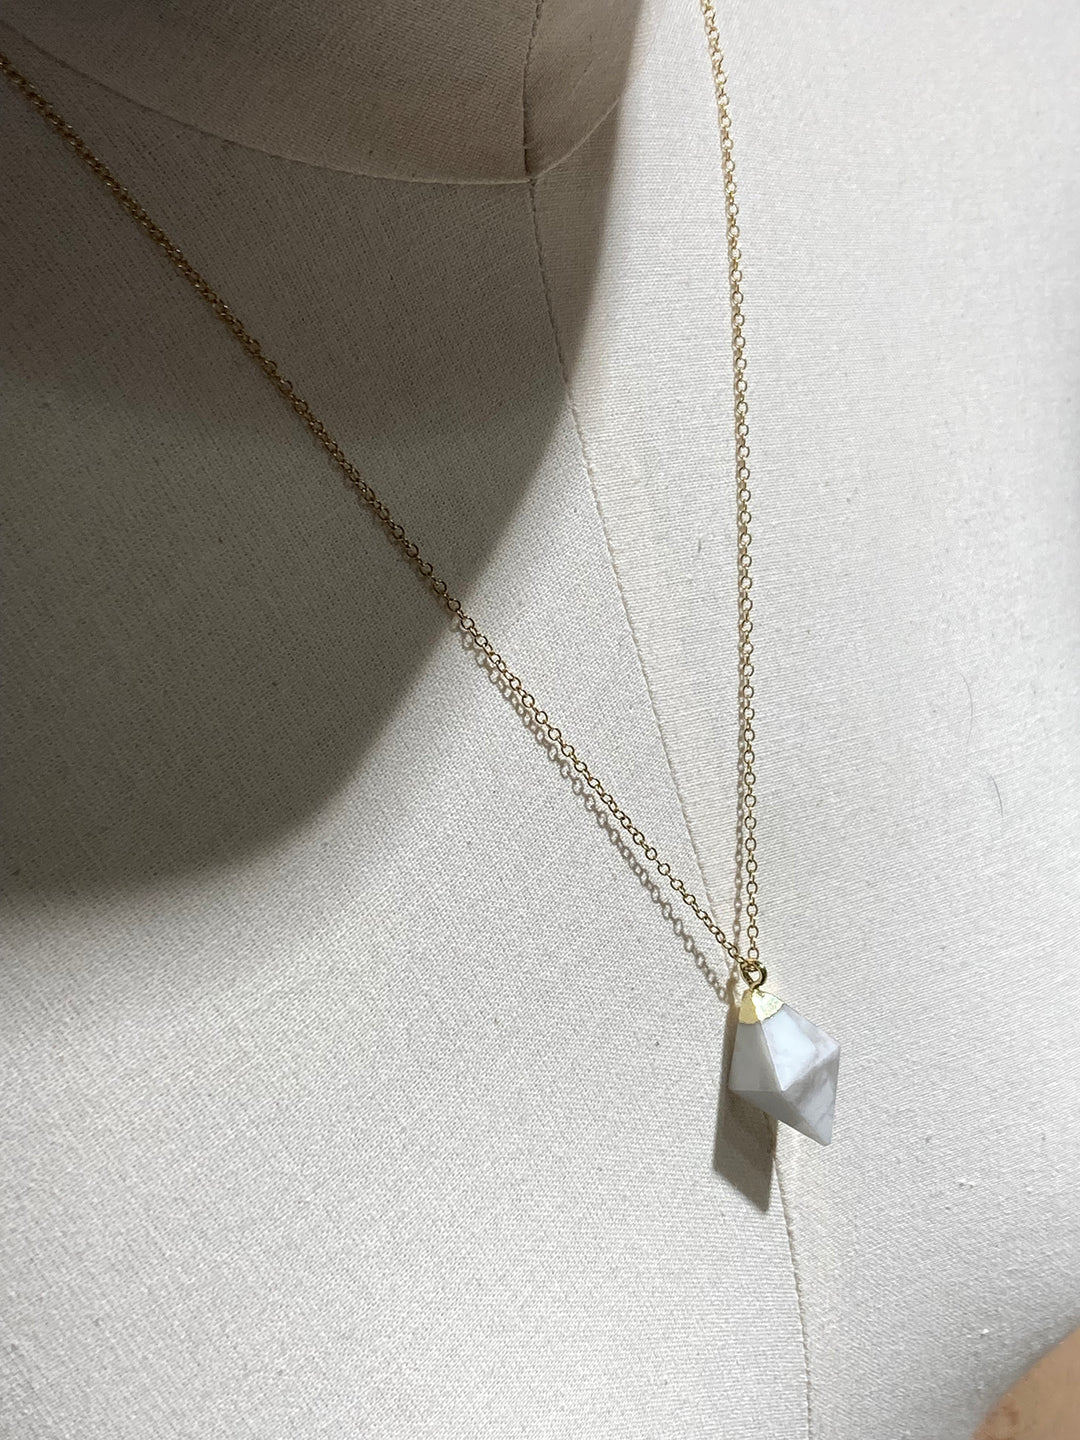 llayers collier pierre protectrice howlite - howlite stone pendant necklace on gold chain